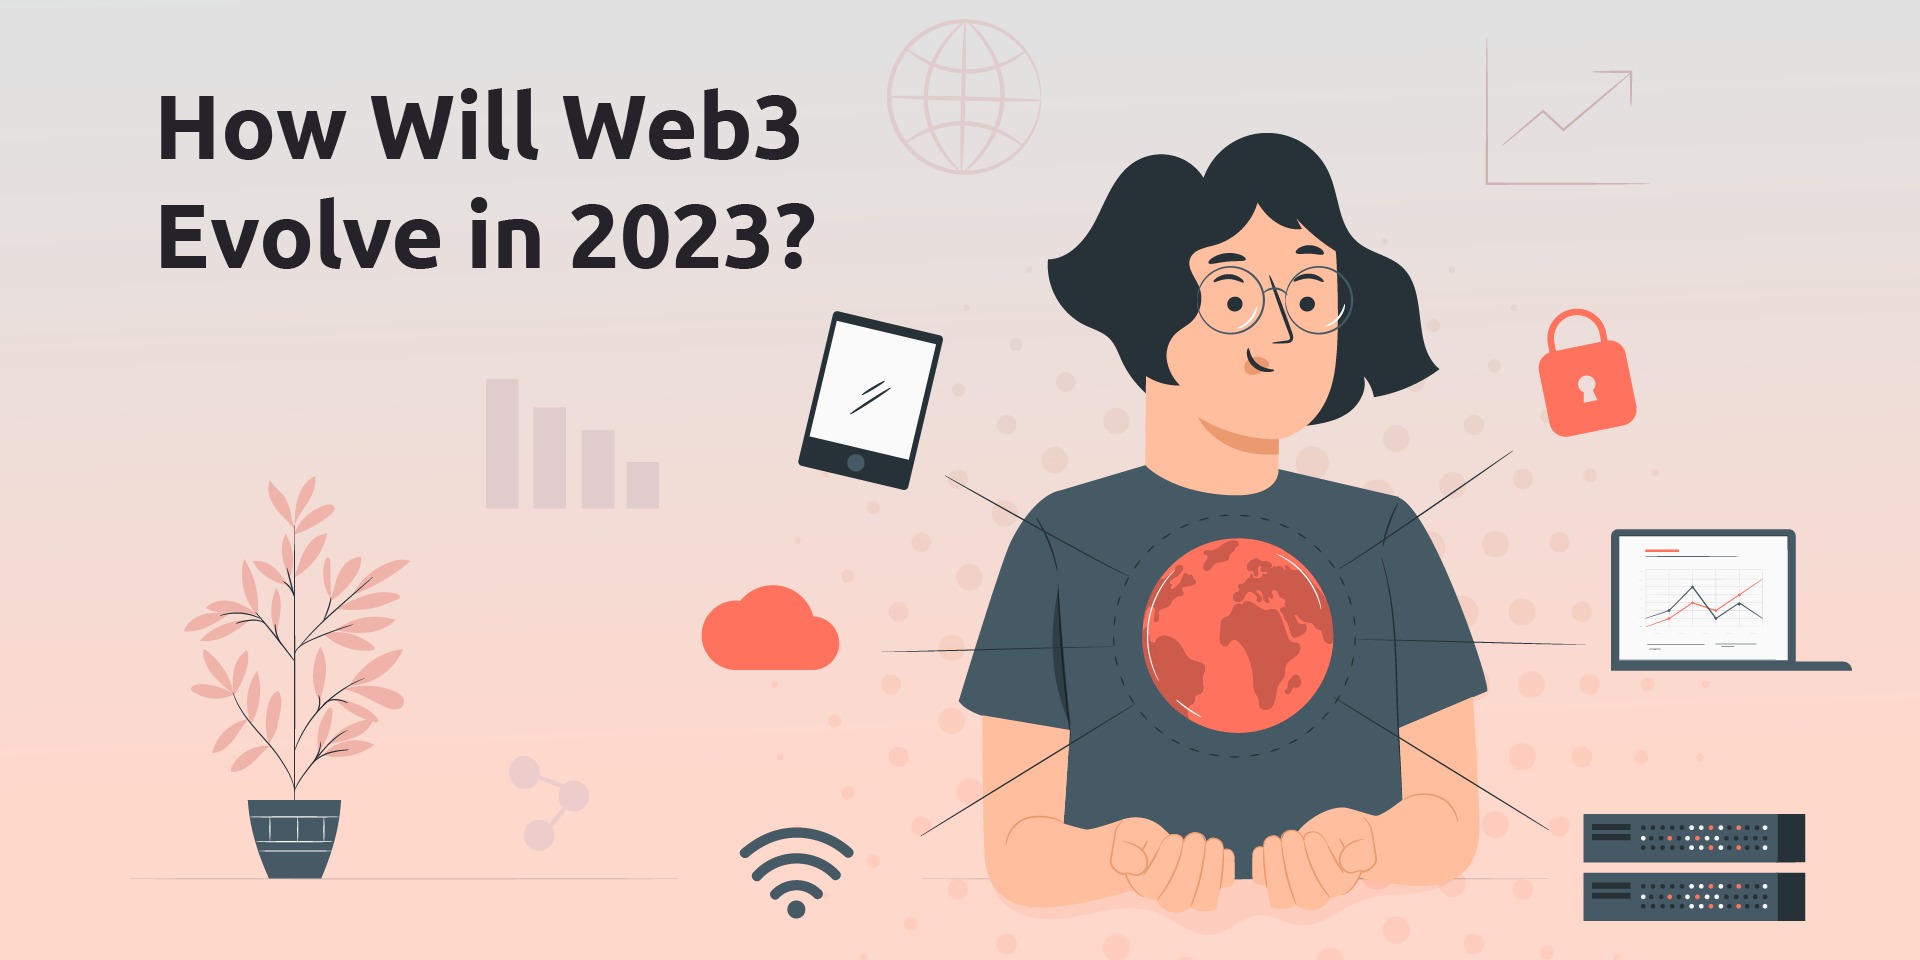 How Will Web3 Evolve in 2023